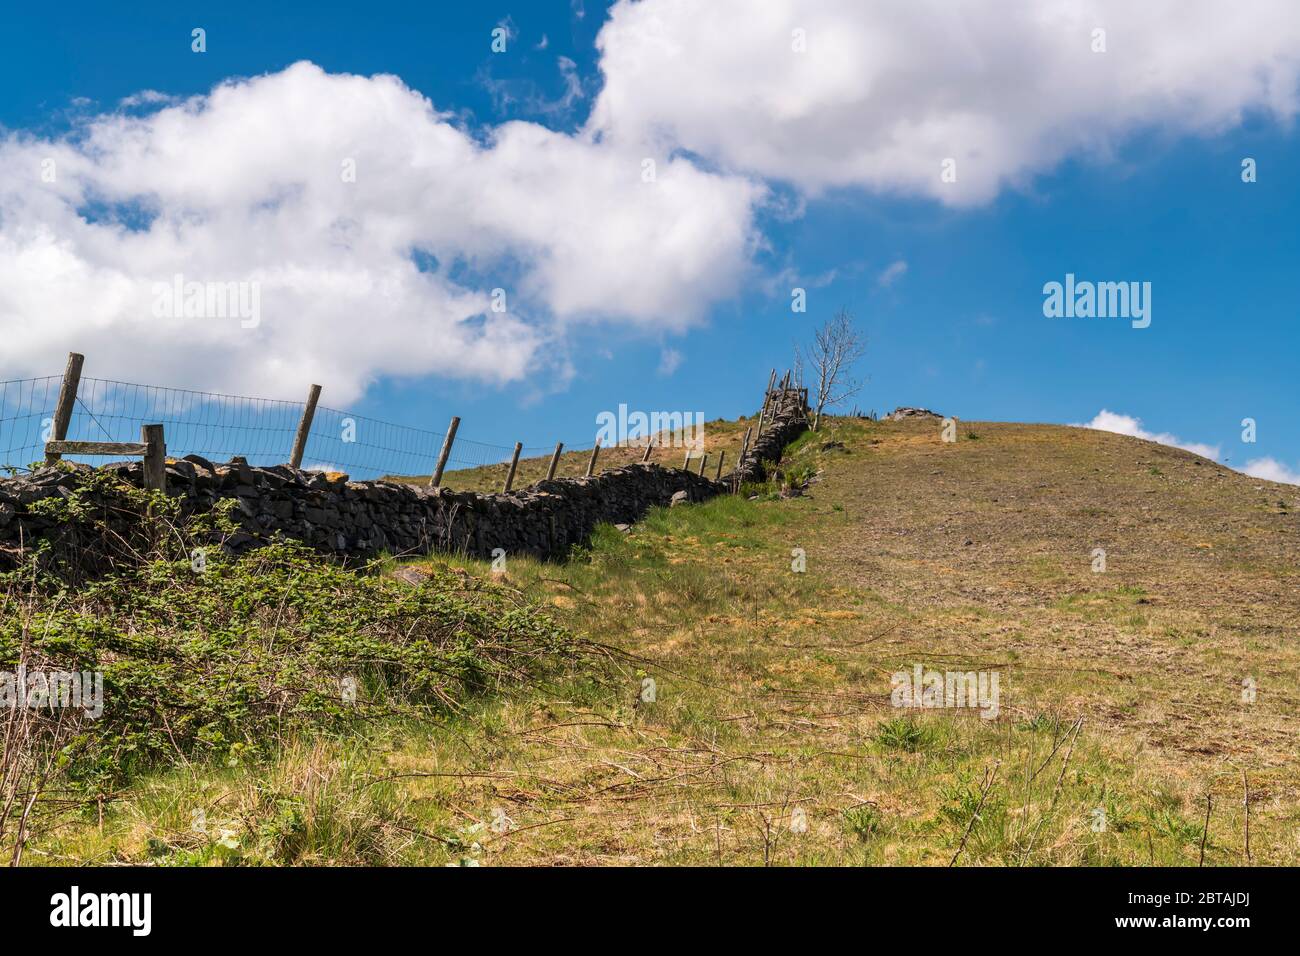 A summer three image HDR of a dry stone wall in the Yorkshire Dales near Helwith Bridge, England. 21 May 2020 Stock Photo